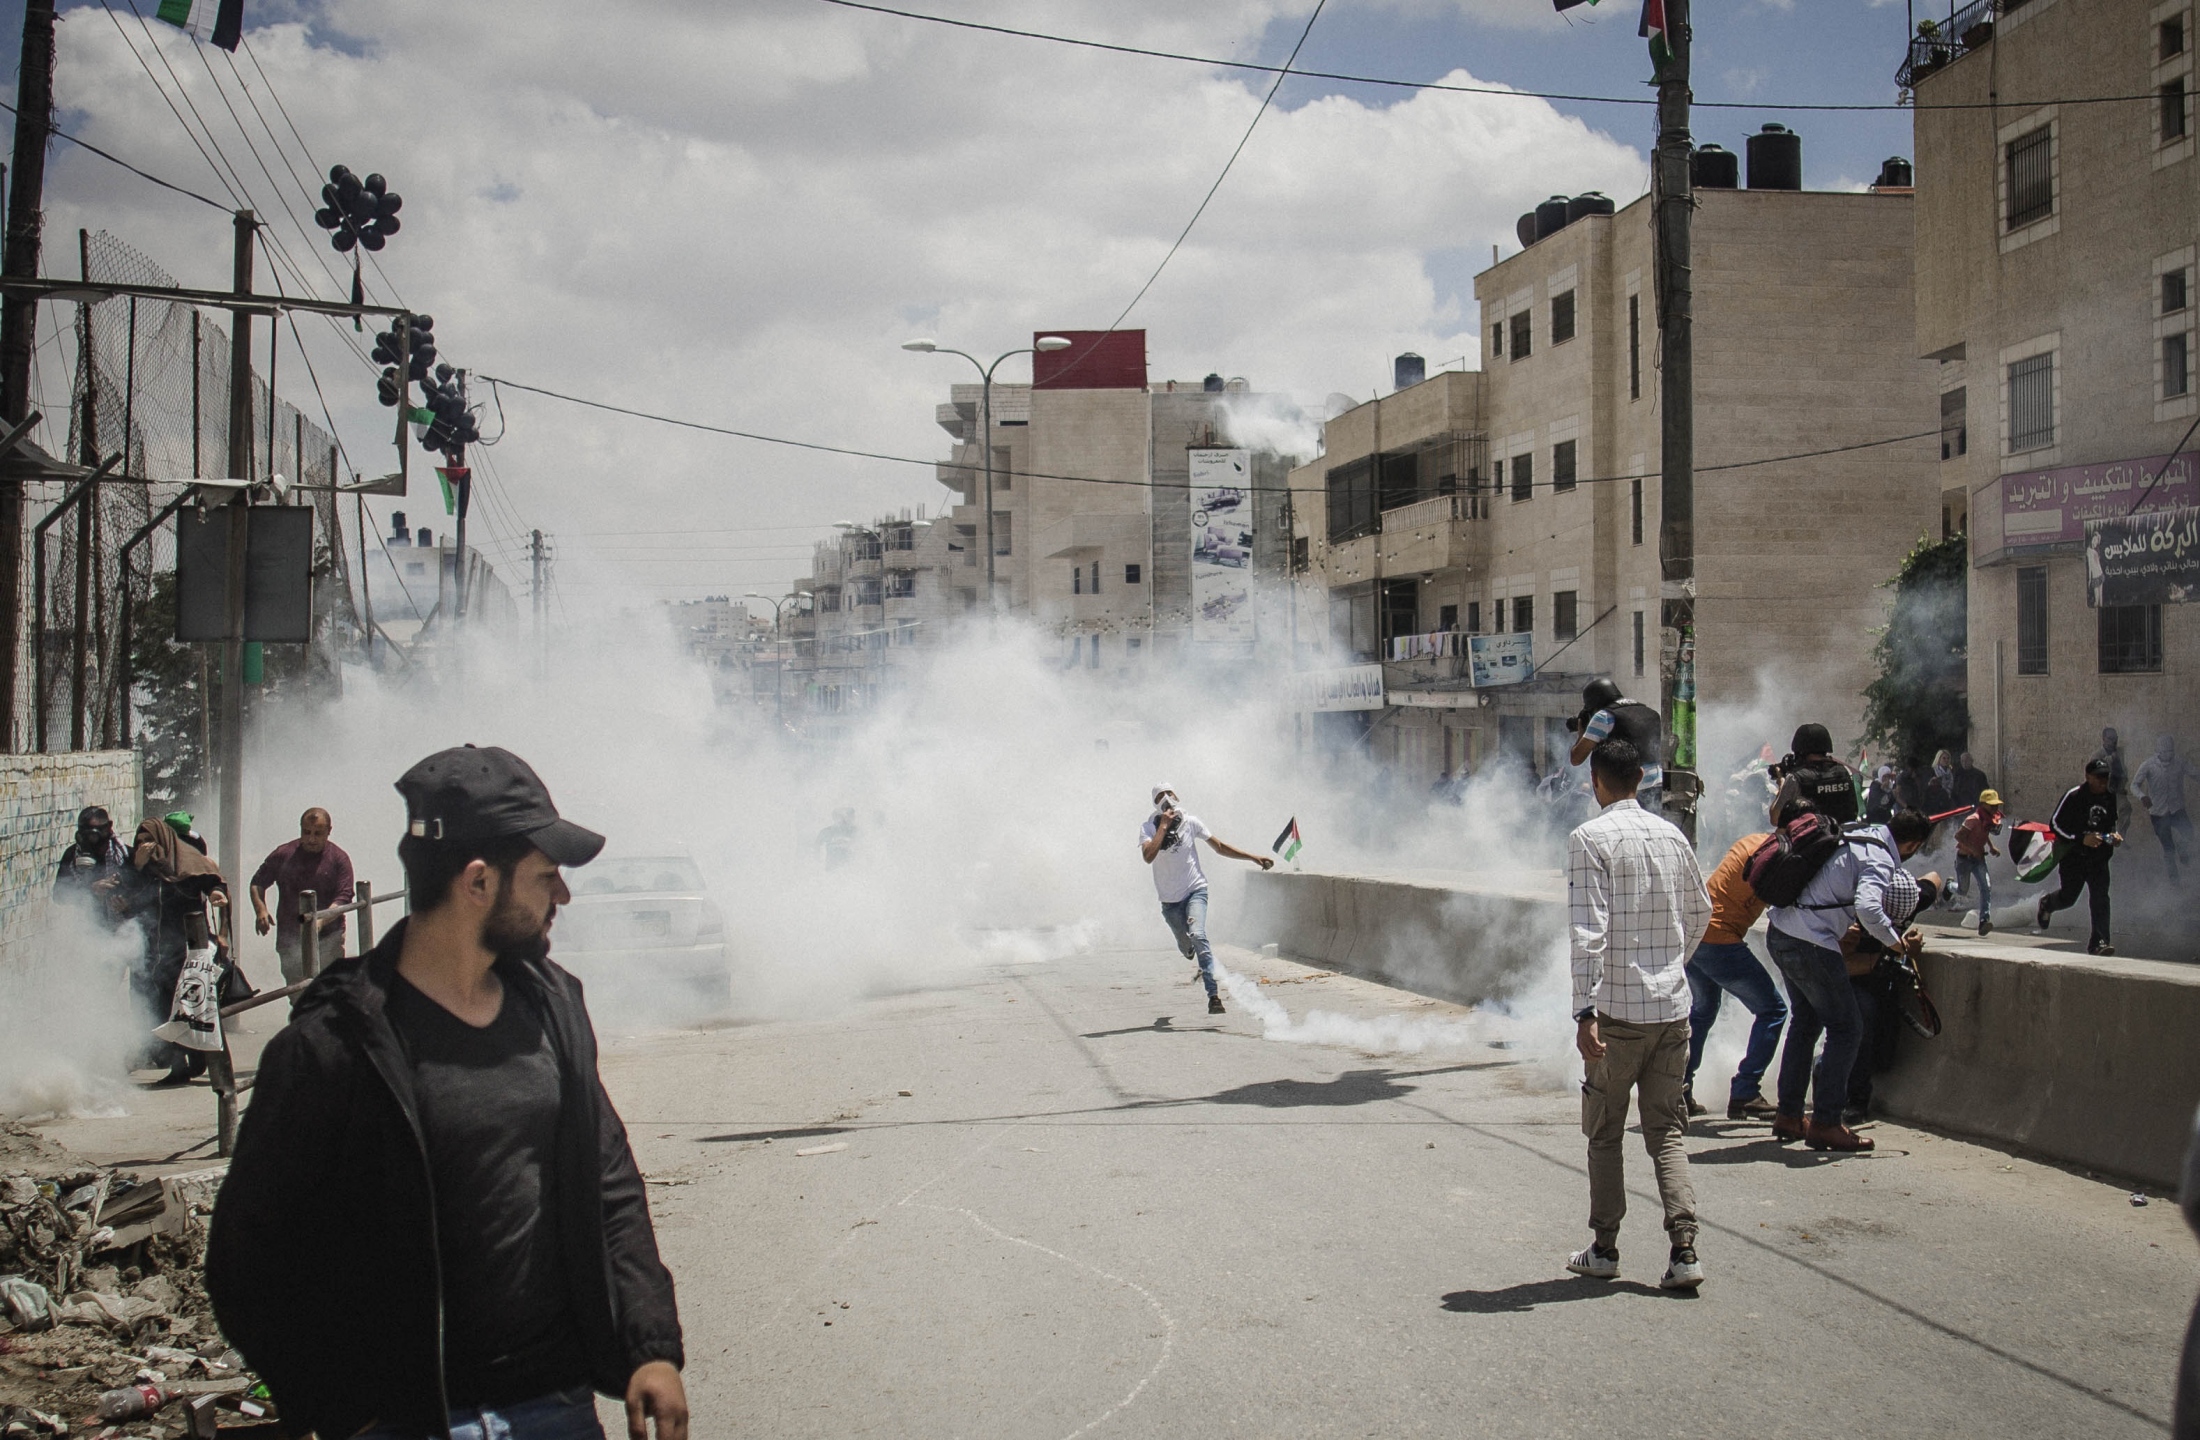 Clashes in Occupied West Bank